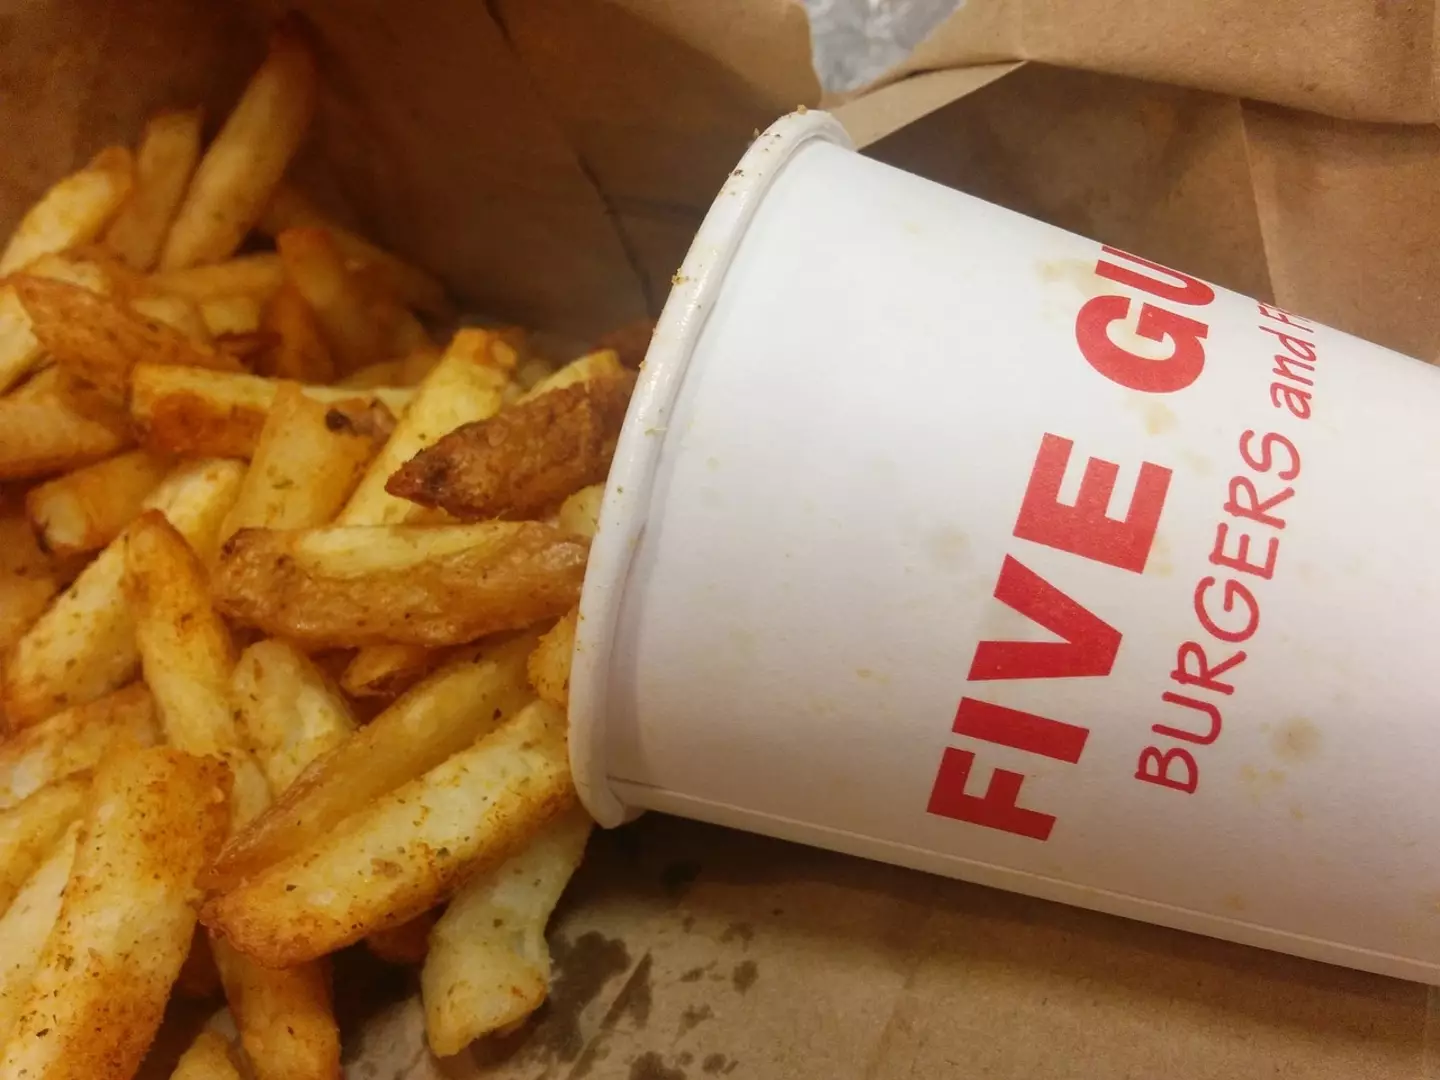 The Five Guys founder has explained why staff give customers so many fries.